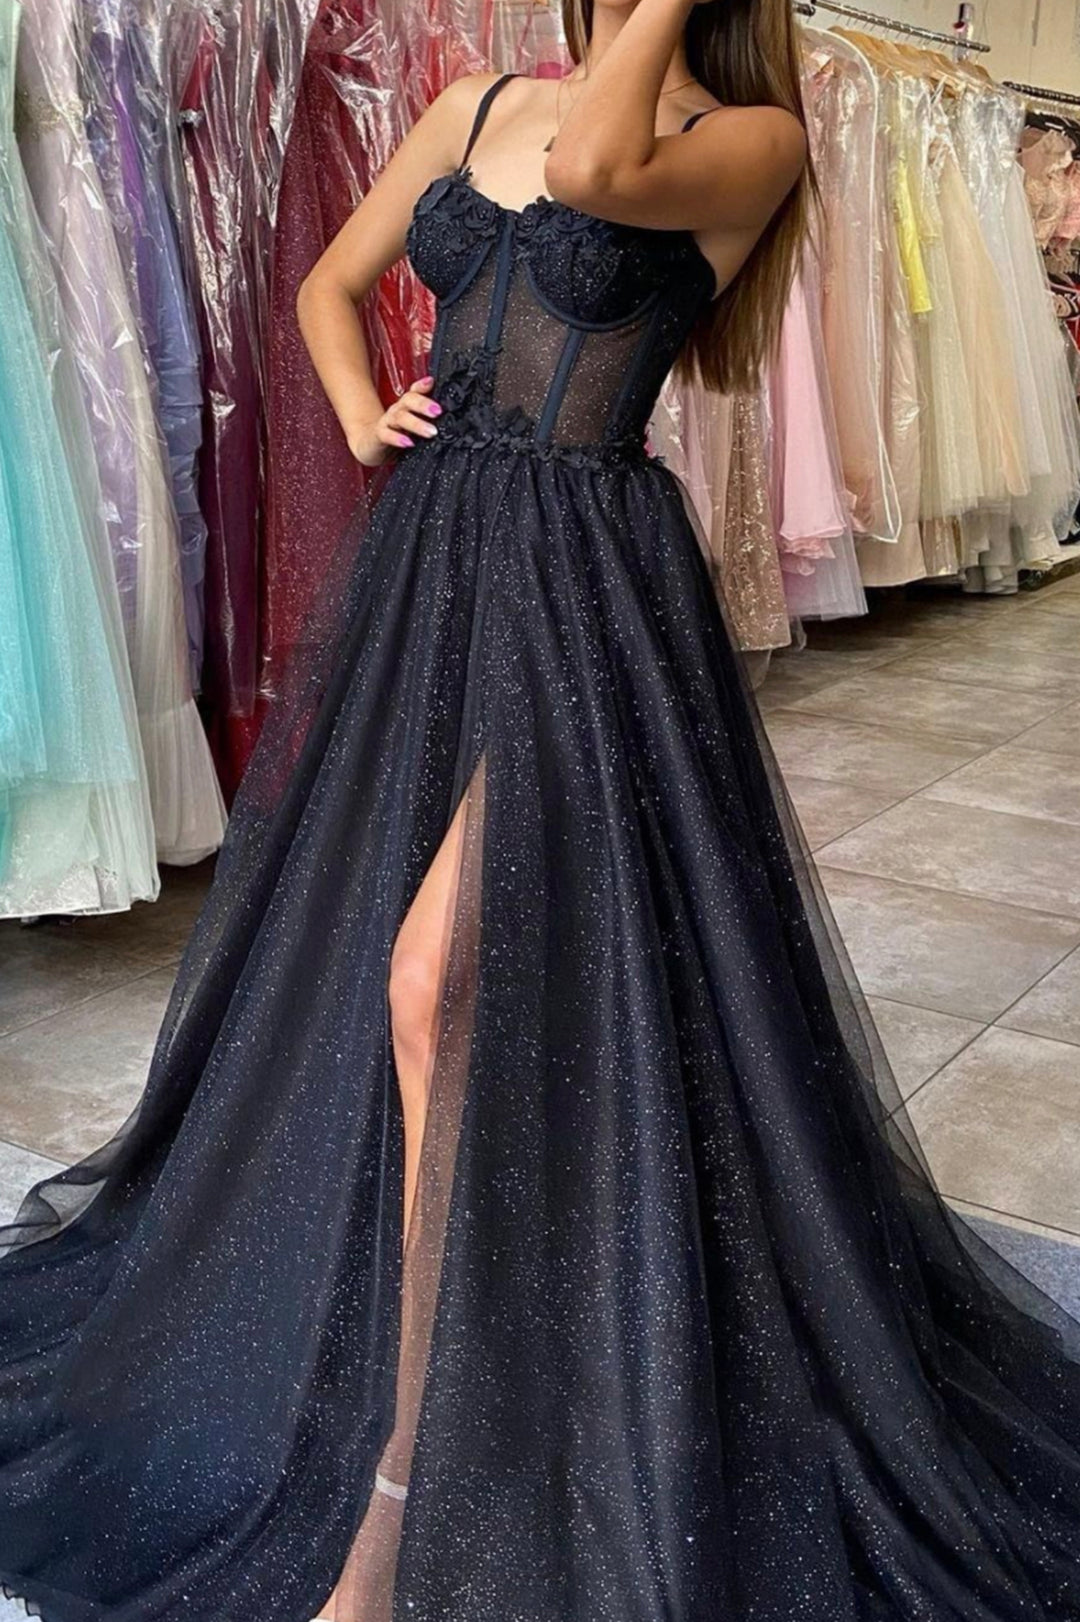 Glitter Prom Ball Gown Dresses for Women Spaghetti Straps Long Formal Dress  with Pocket Black Size 2 at Amazon Women's Clothing store